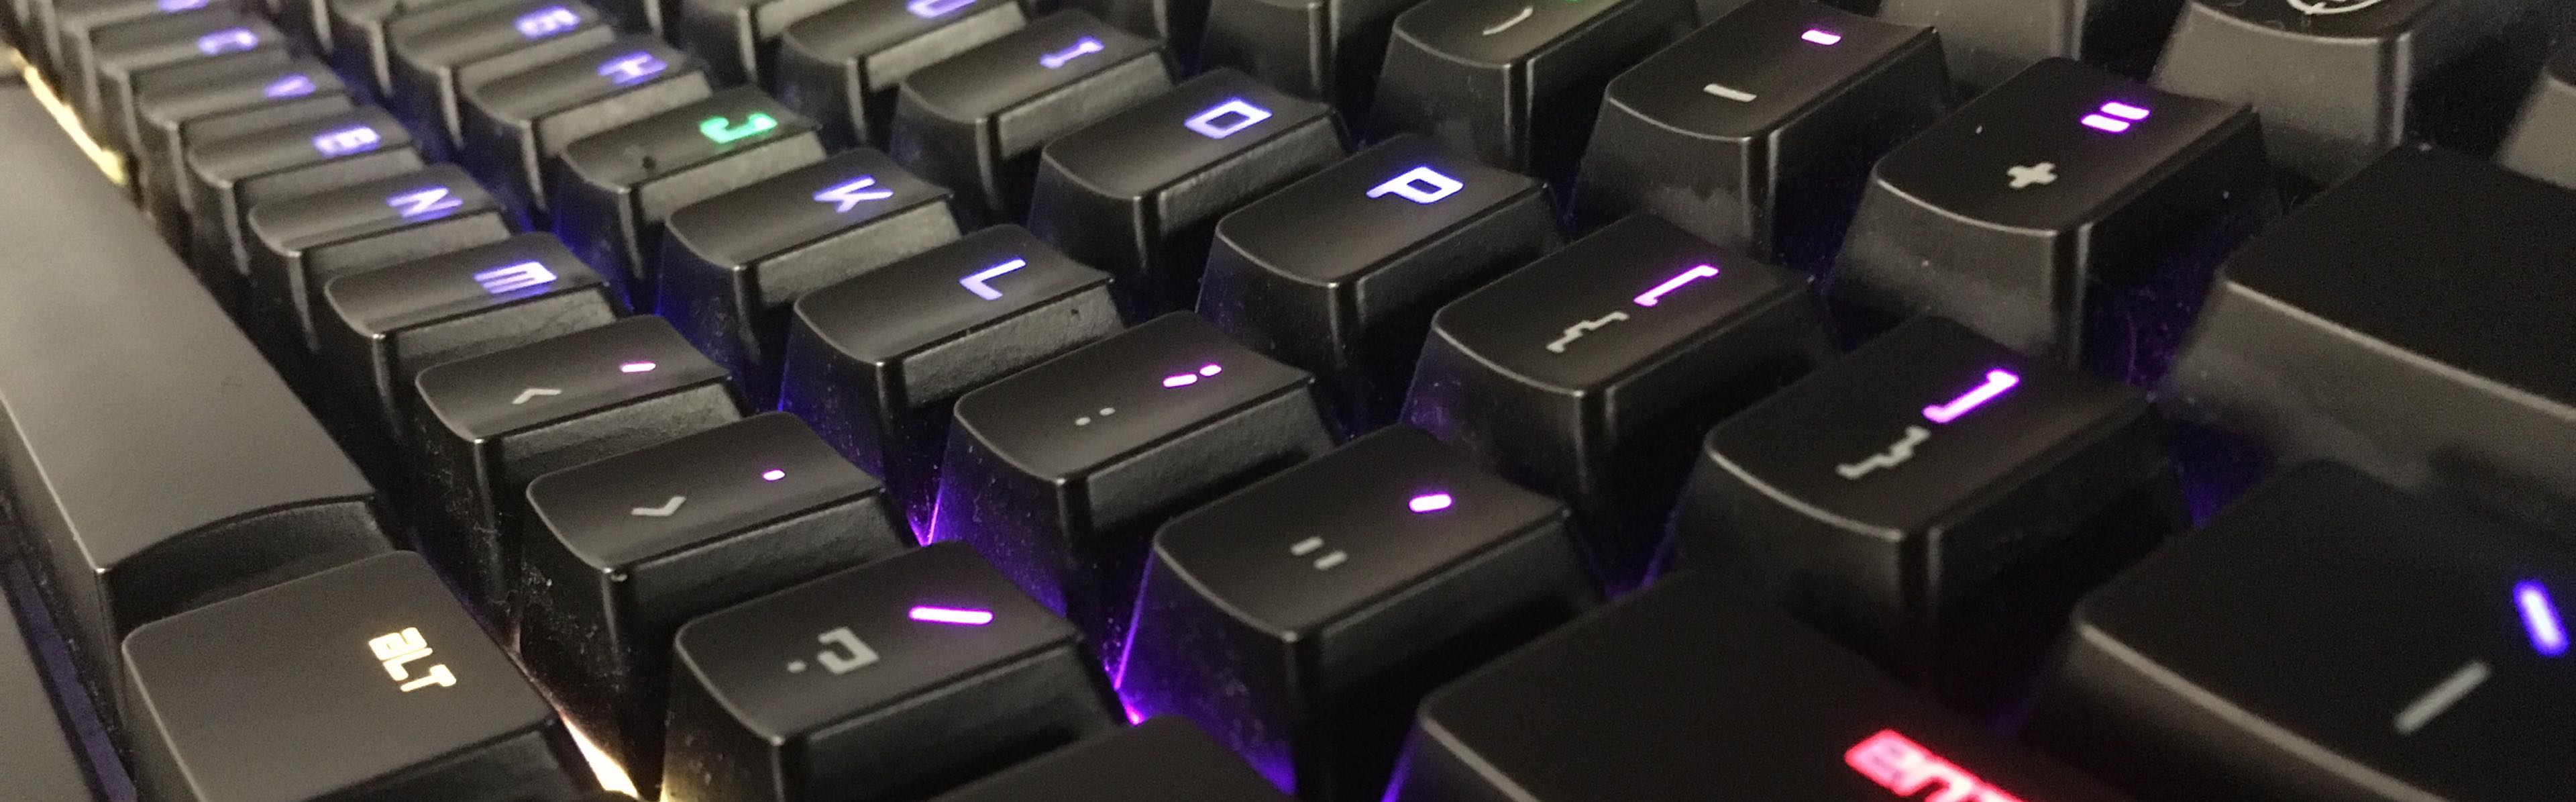 Artistic close-up photo of my RGB coloured mechanical keyboard